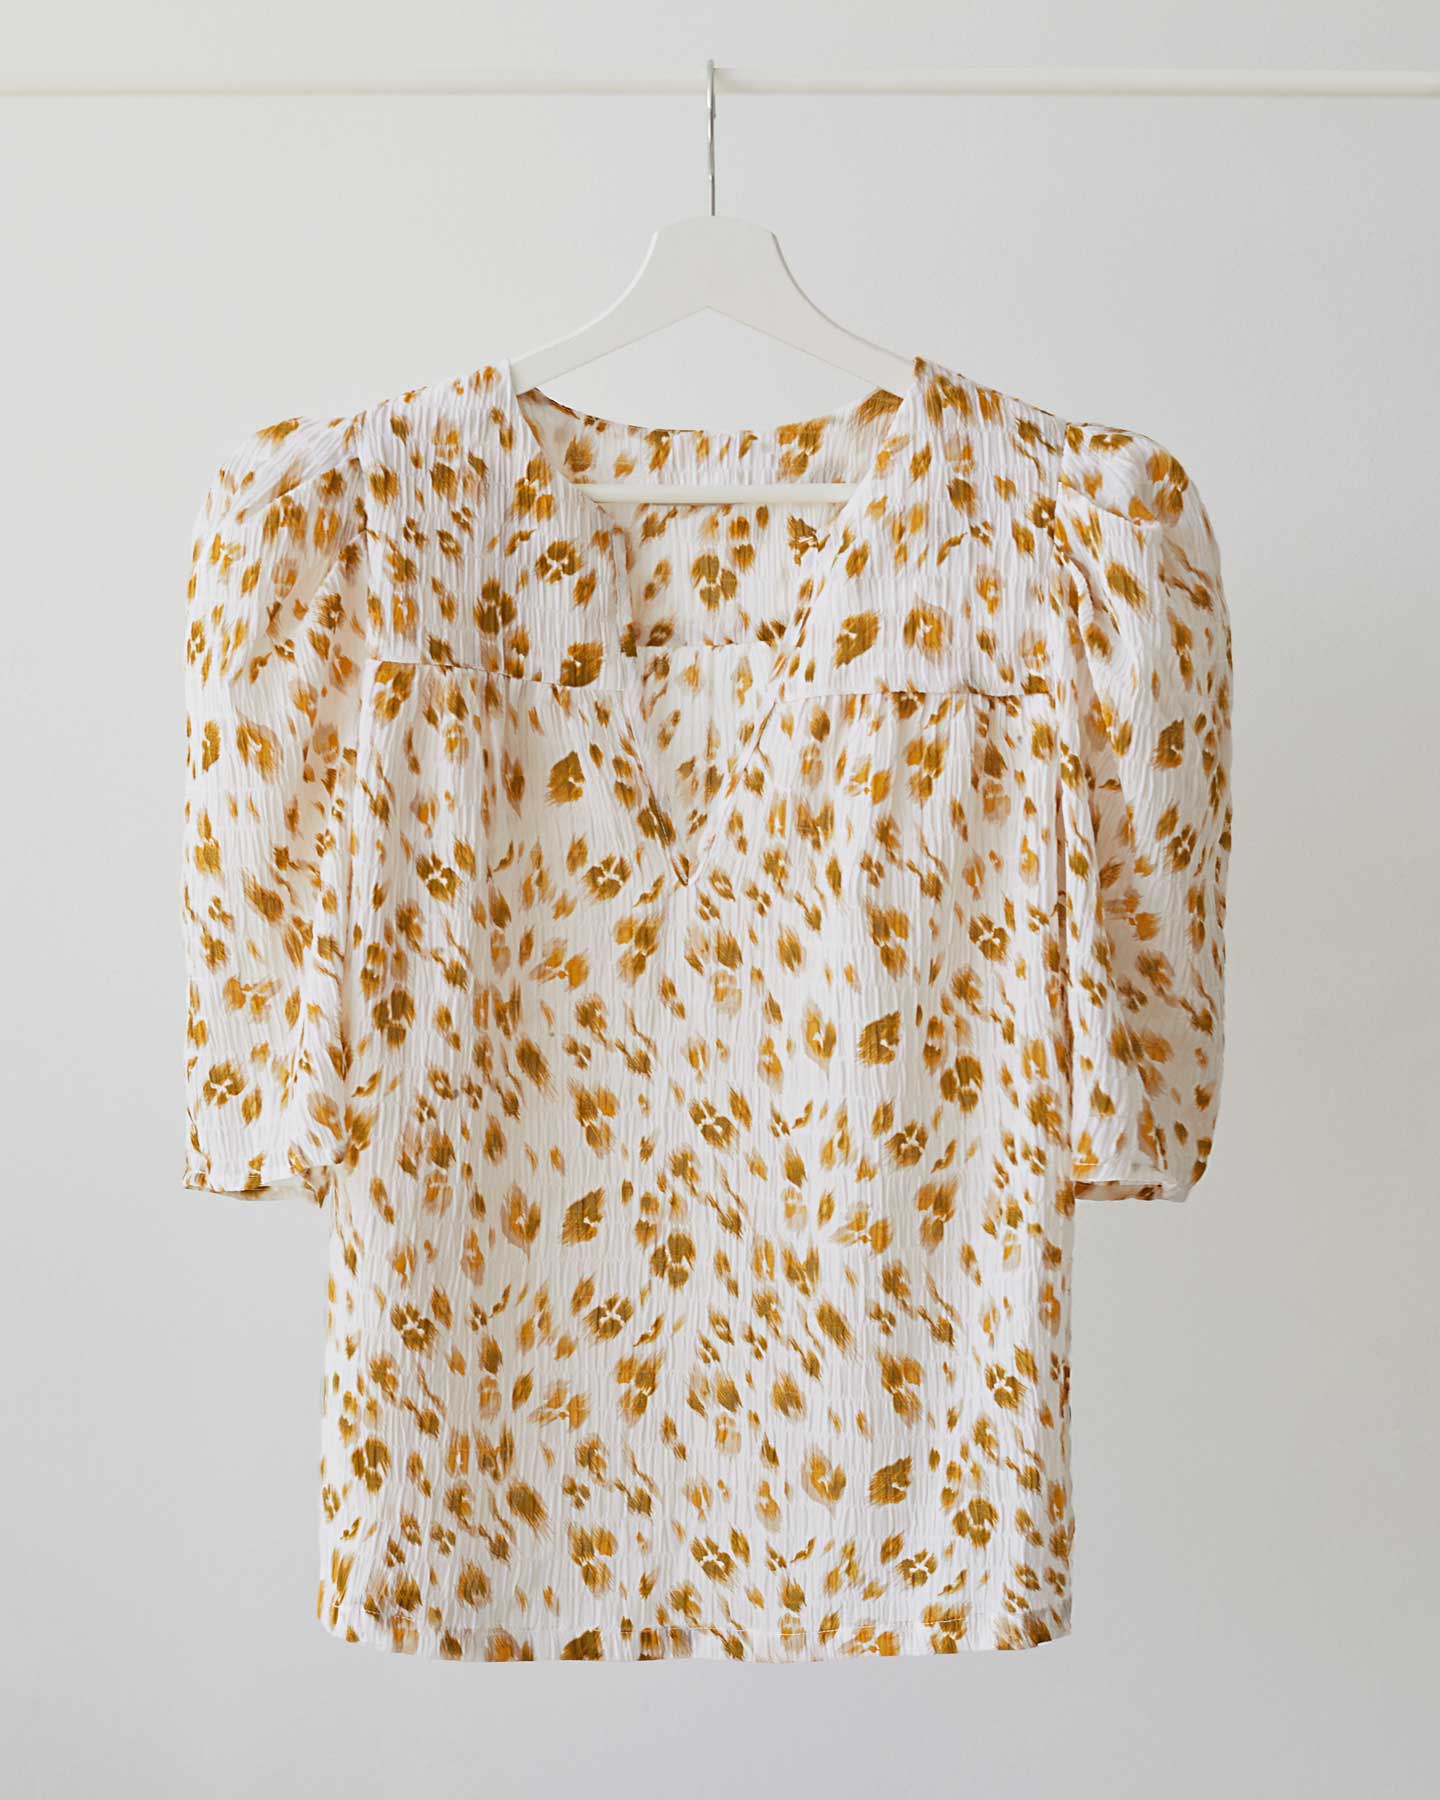 Buy Women's Pour Moi Puff Sleeve Shirts Online